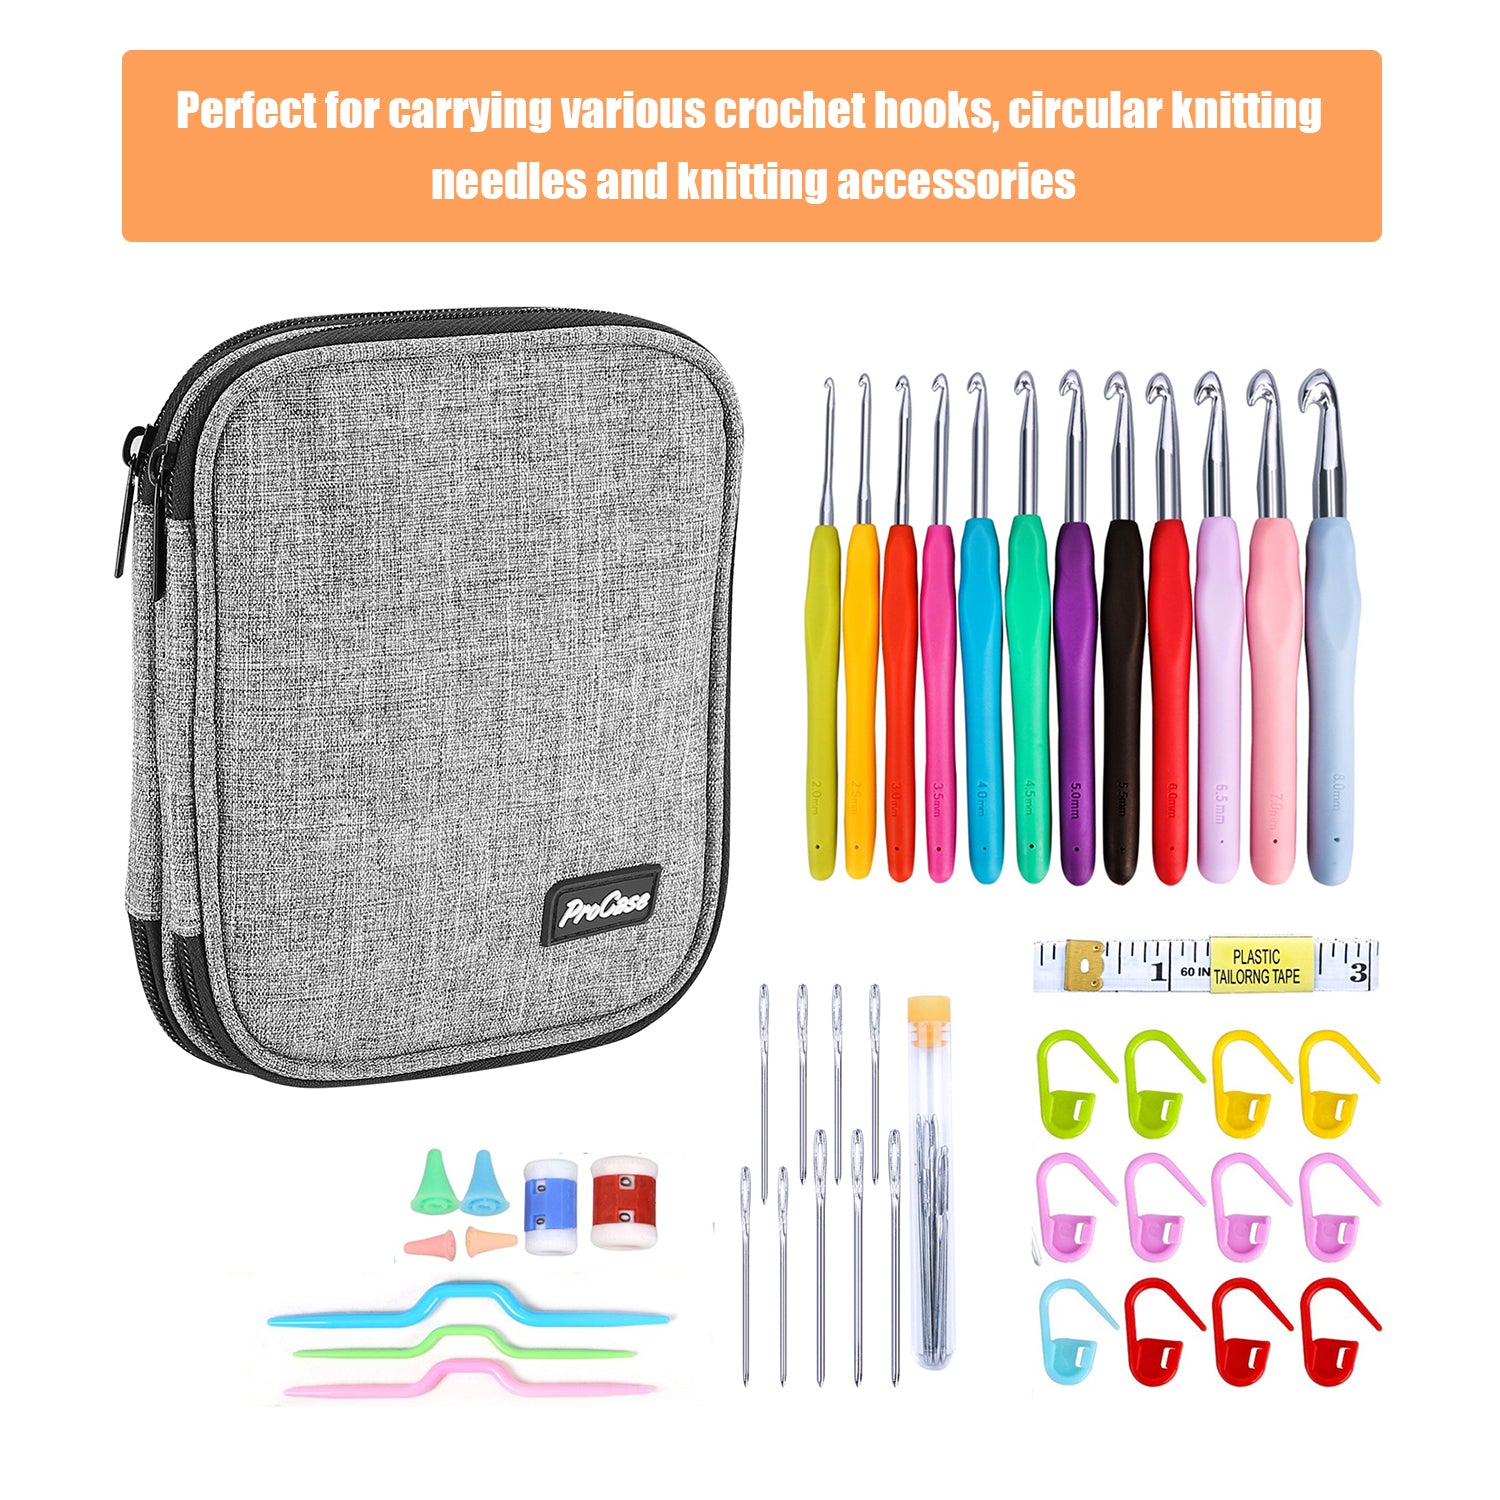 ProCase Crochet Hook Case (Up to 6.5 Inches), Travel Organizer Zipper Bag for Various Crochet Hooks, Circular Knitting Needles and Other Accessories